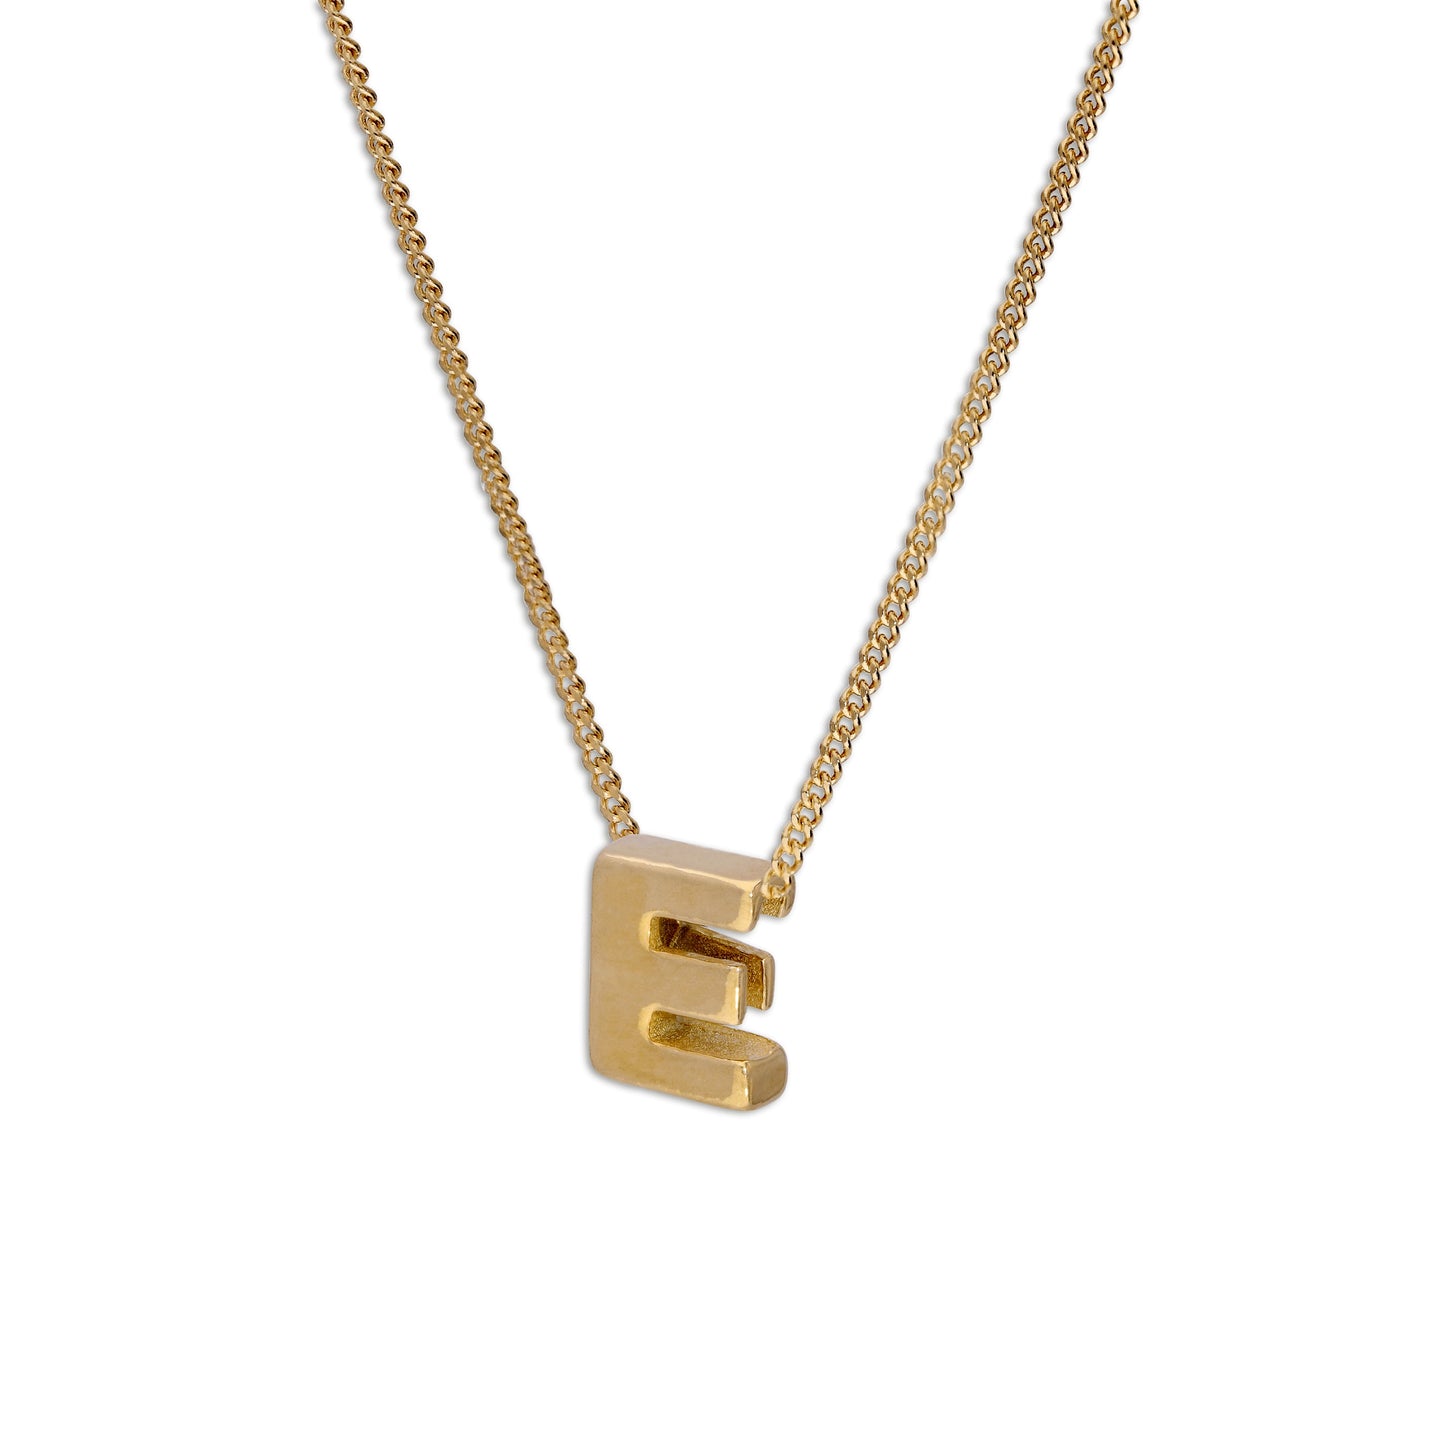 Gold Plated Sterling Silver Threader Letter E Bead Necklace 16 - 22 Inches